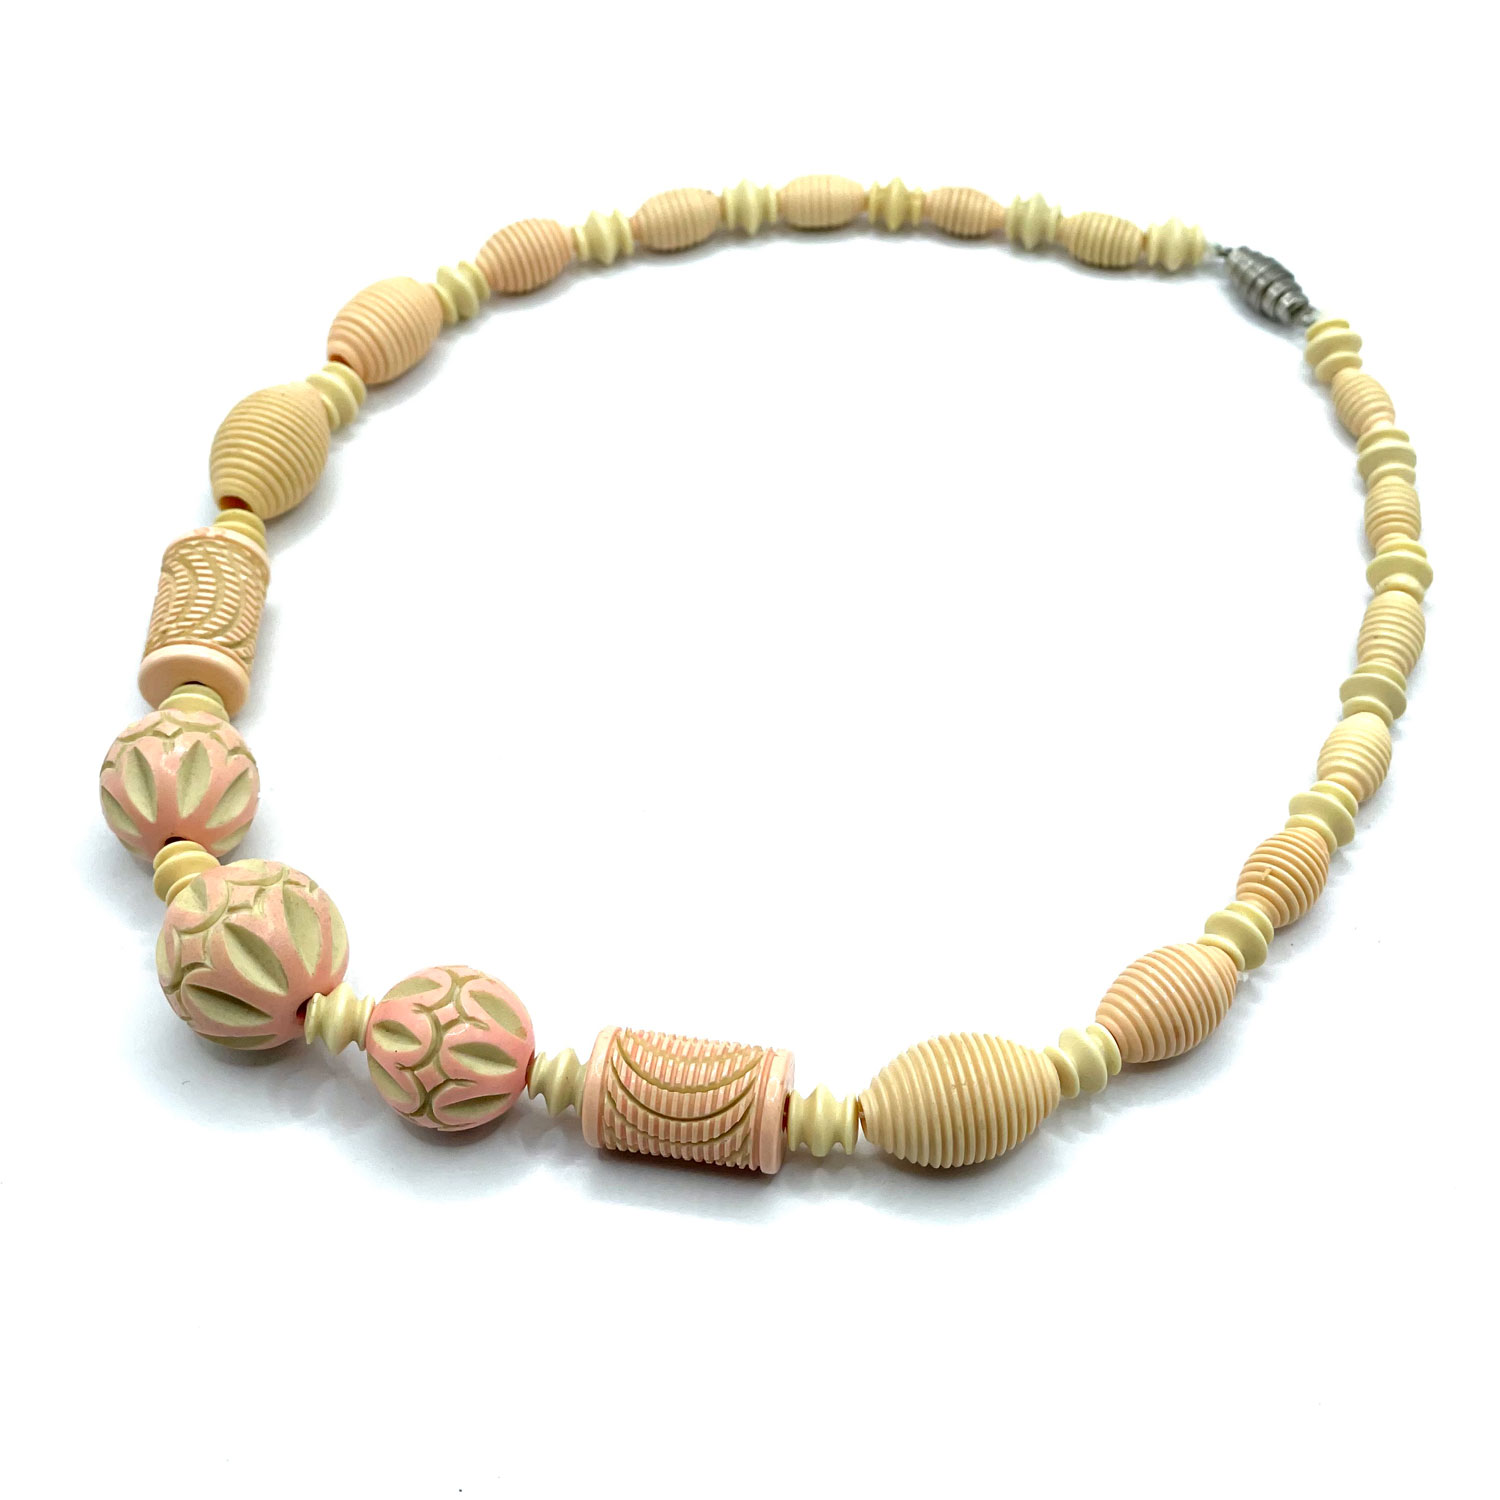 1930s celluloid bead necklace